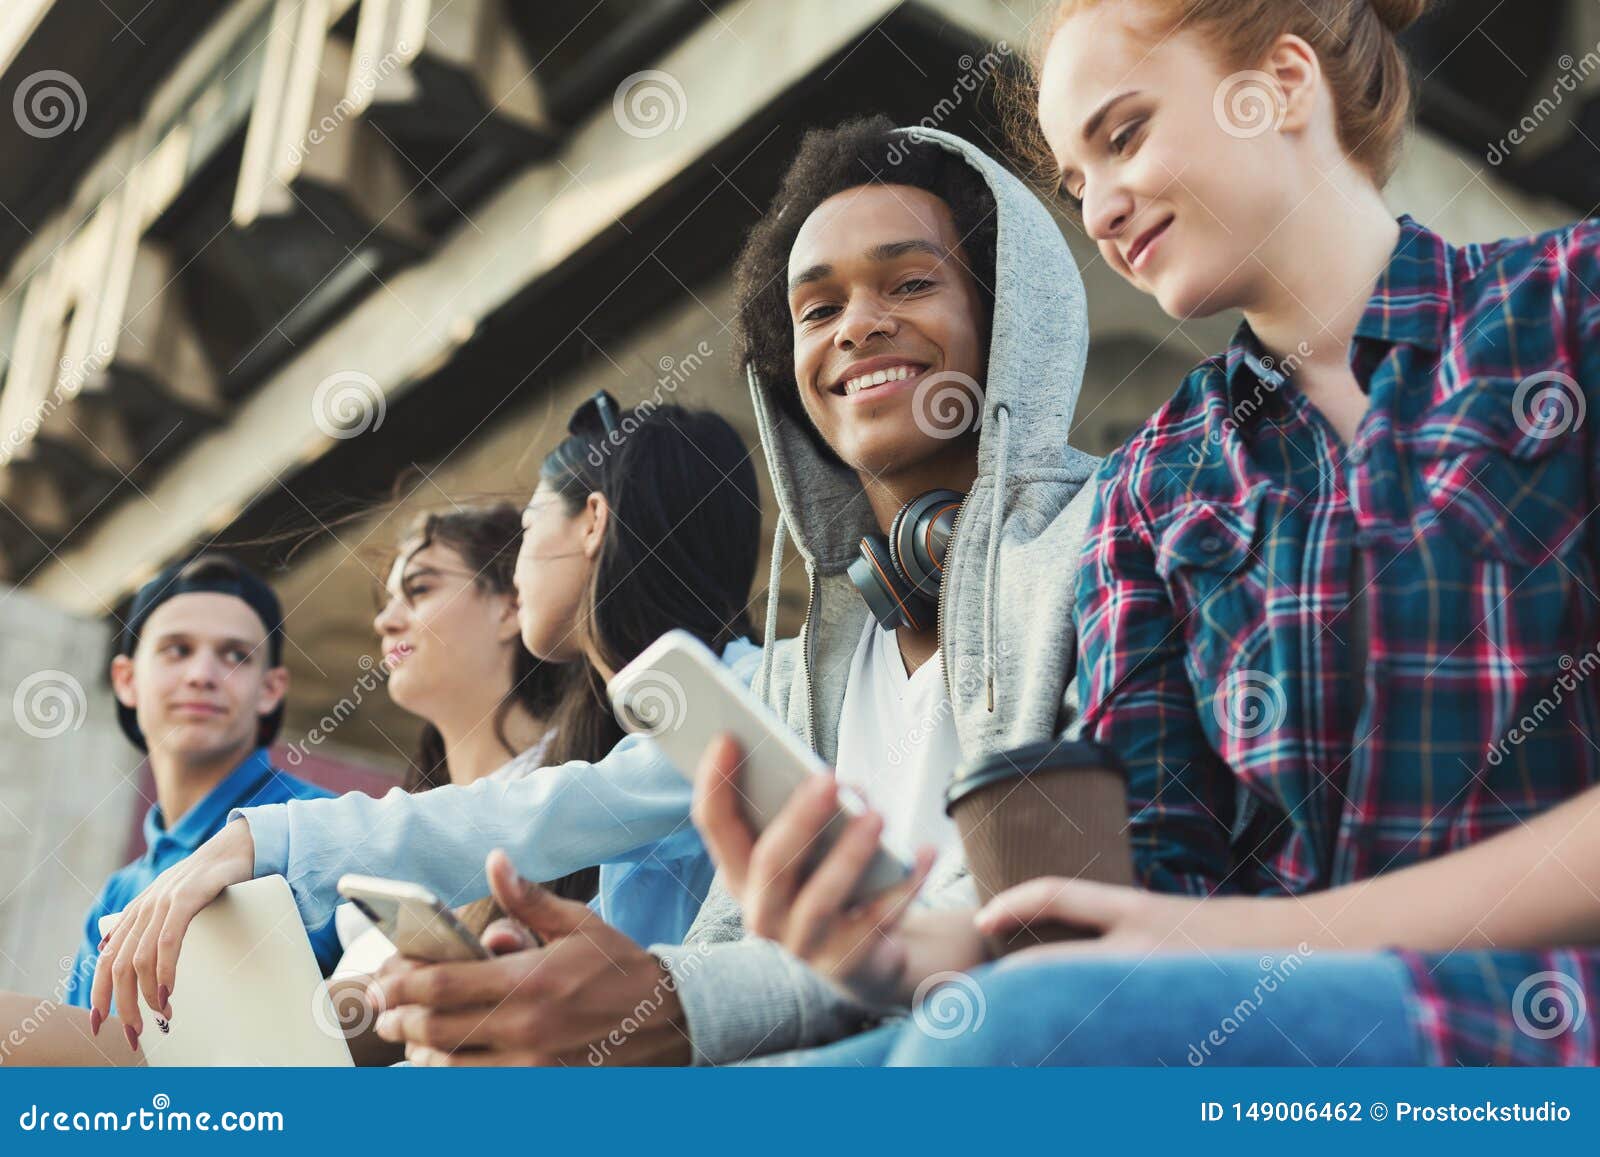 multiethnic teen friends sitting outdoors, talking and using gadgets